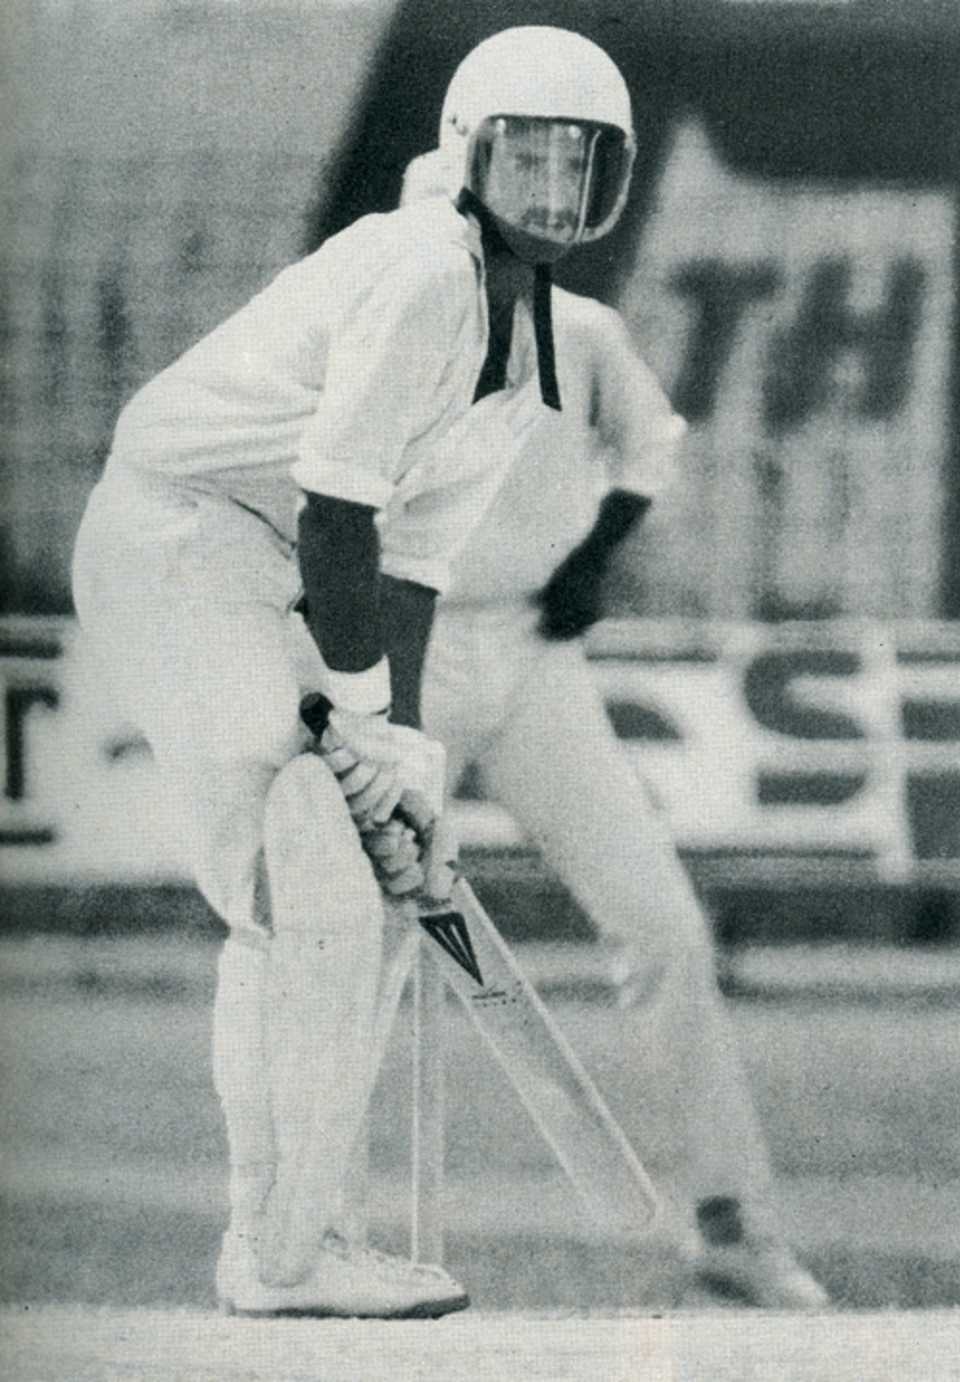 Graham Yallop takes guard in a helmet